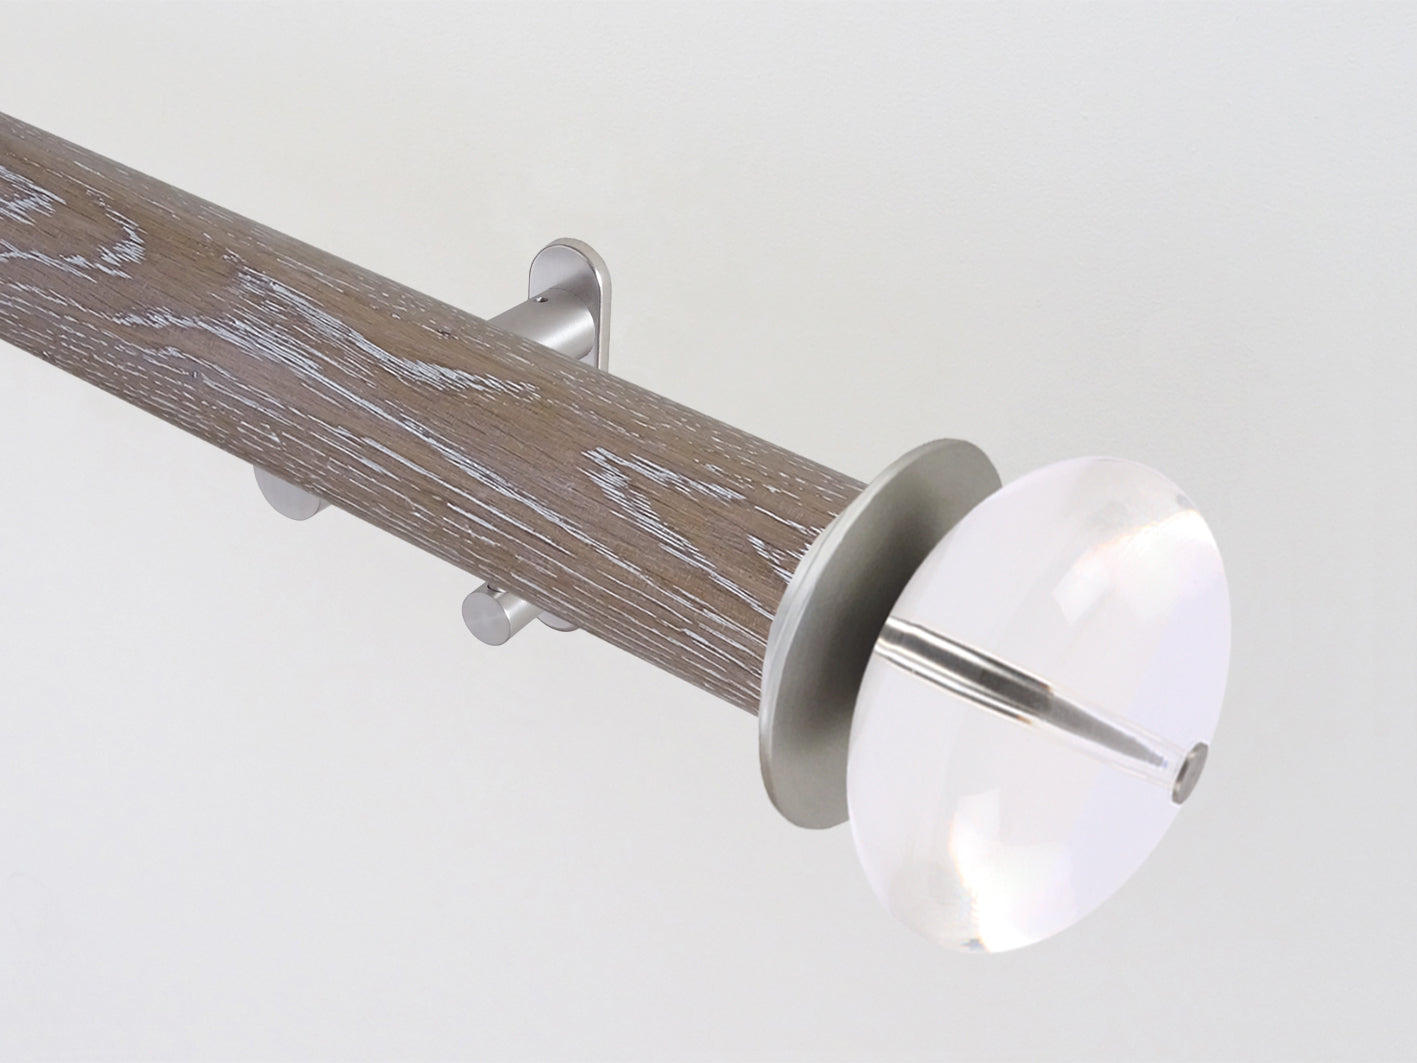 Quality real solid tawny oak curtain pole set with perspex finials and hidden track | Walcot House